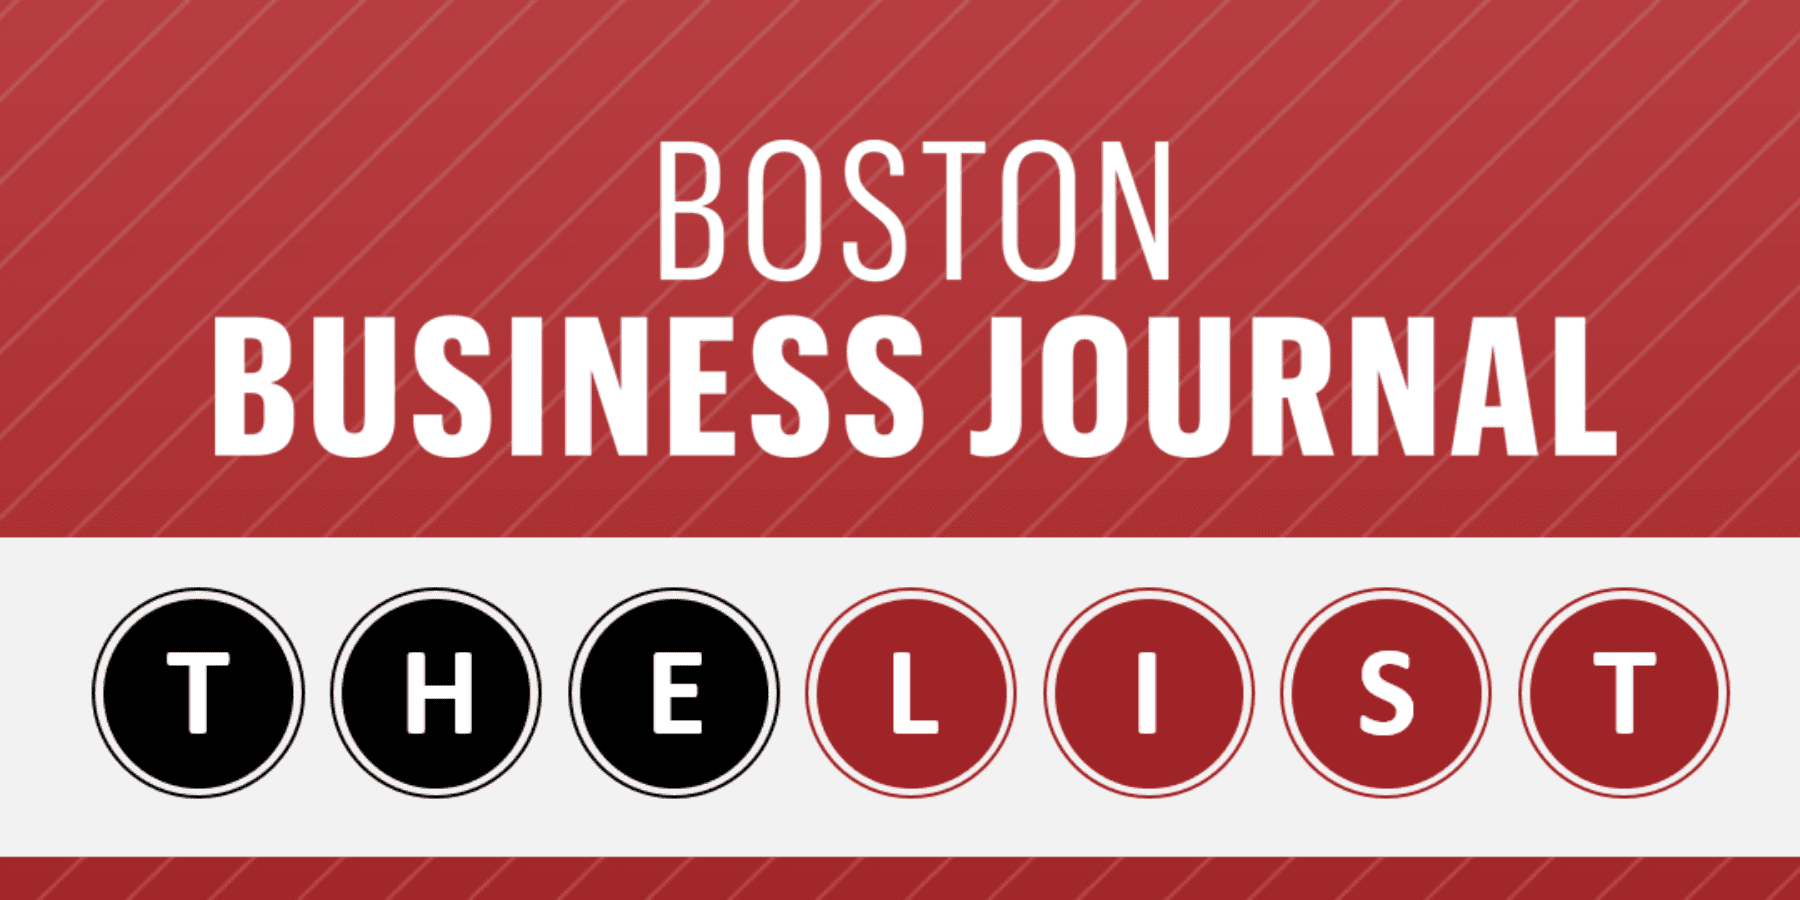 Bankw staffing named to 2019 boston business journal executive search & largest temporary placement lists